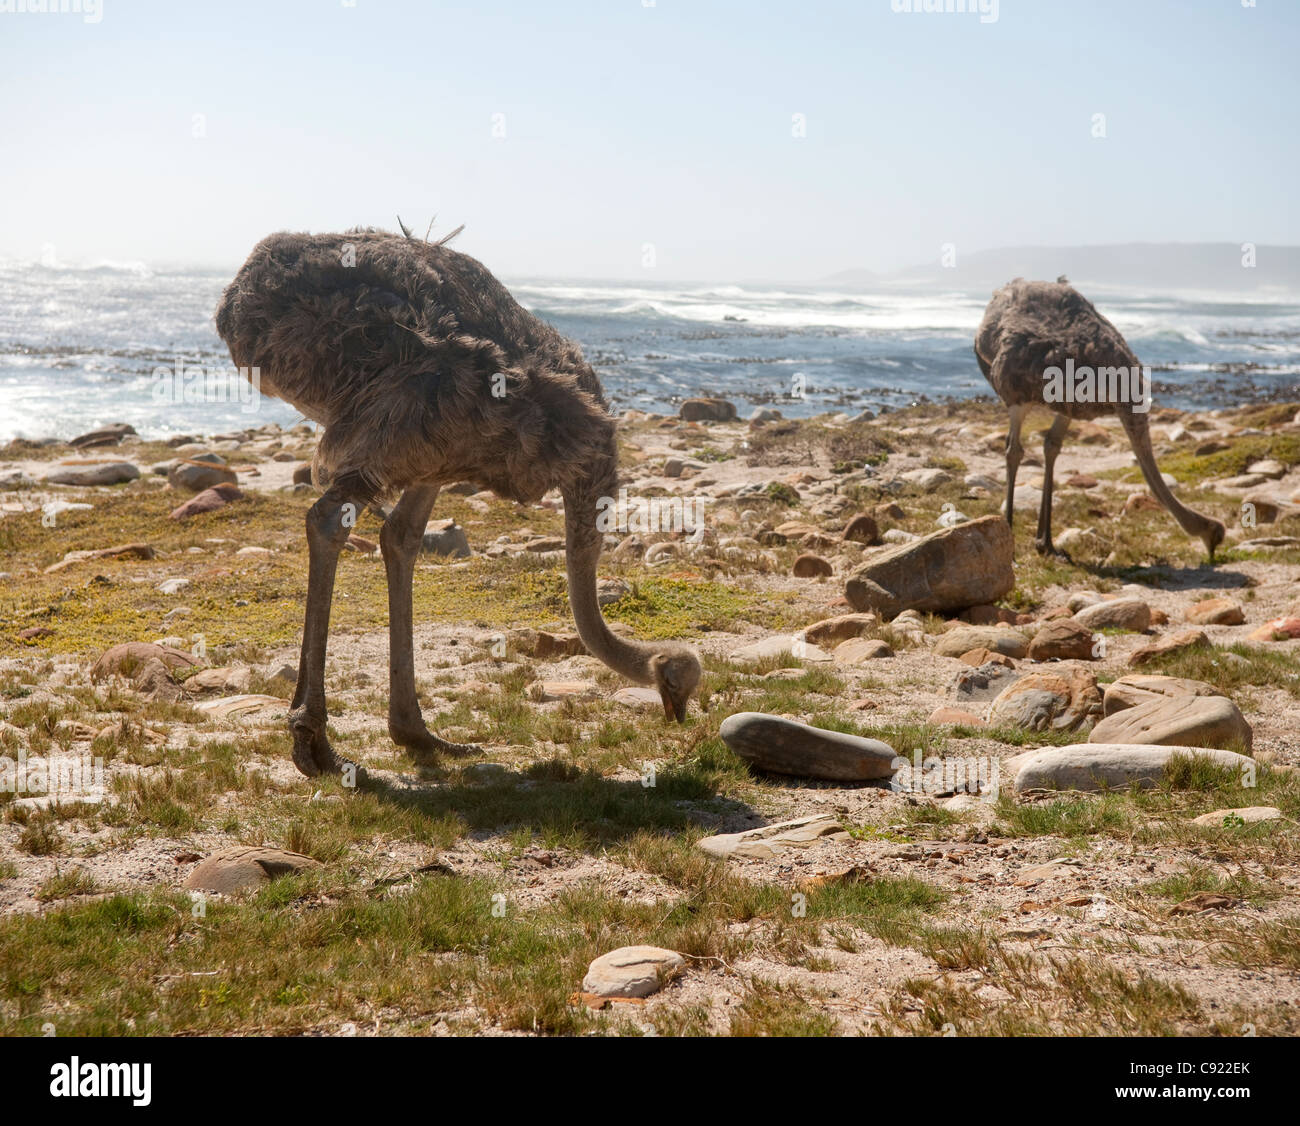 Wild Ostriches can be found all over the Cape Point national park and are often found foraging next to the beaches near the Stock Photo